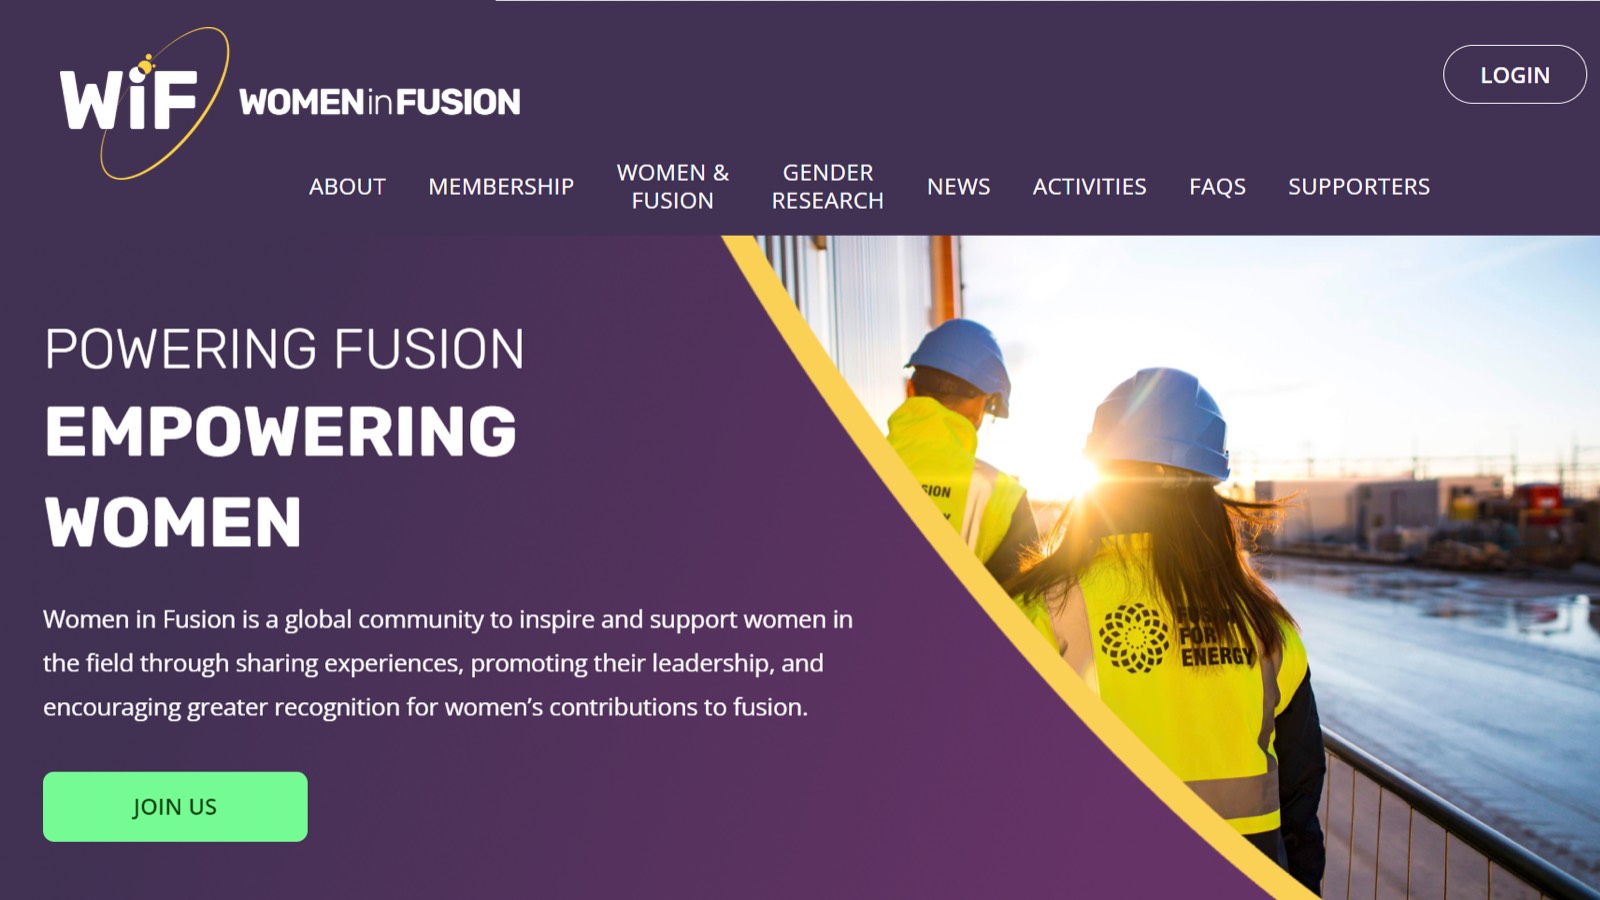 Women in Fusion initiative website launched - EUROfusion